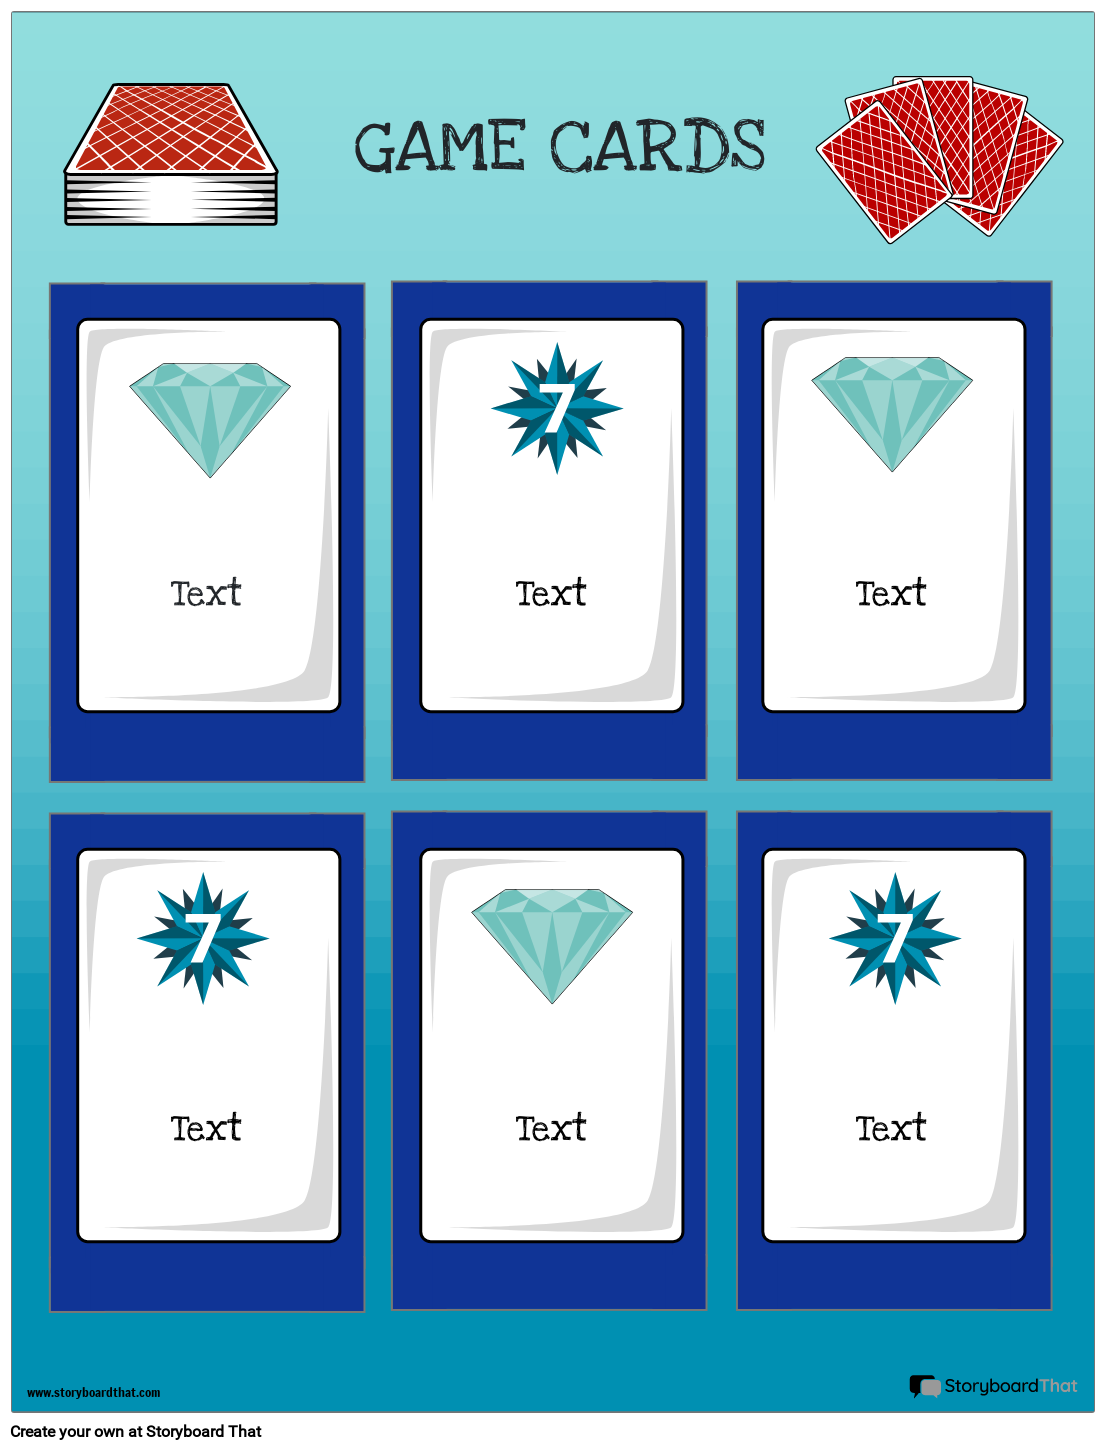 Card Template for a card game i'm making - Creations Feedback - Developer  Forum